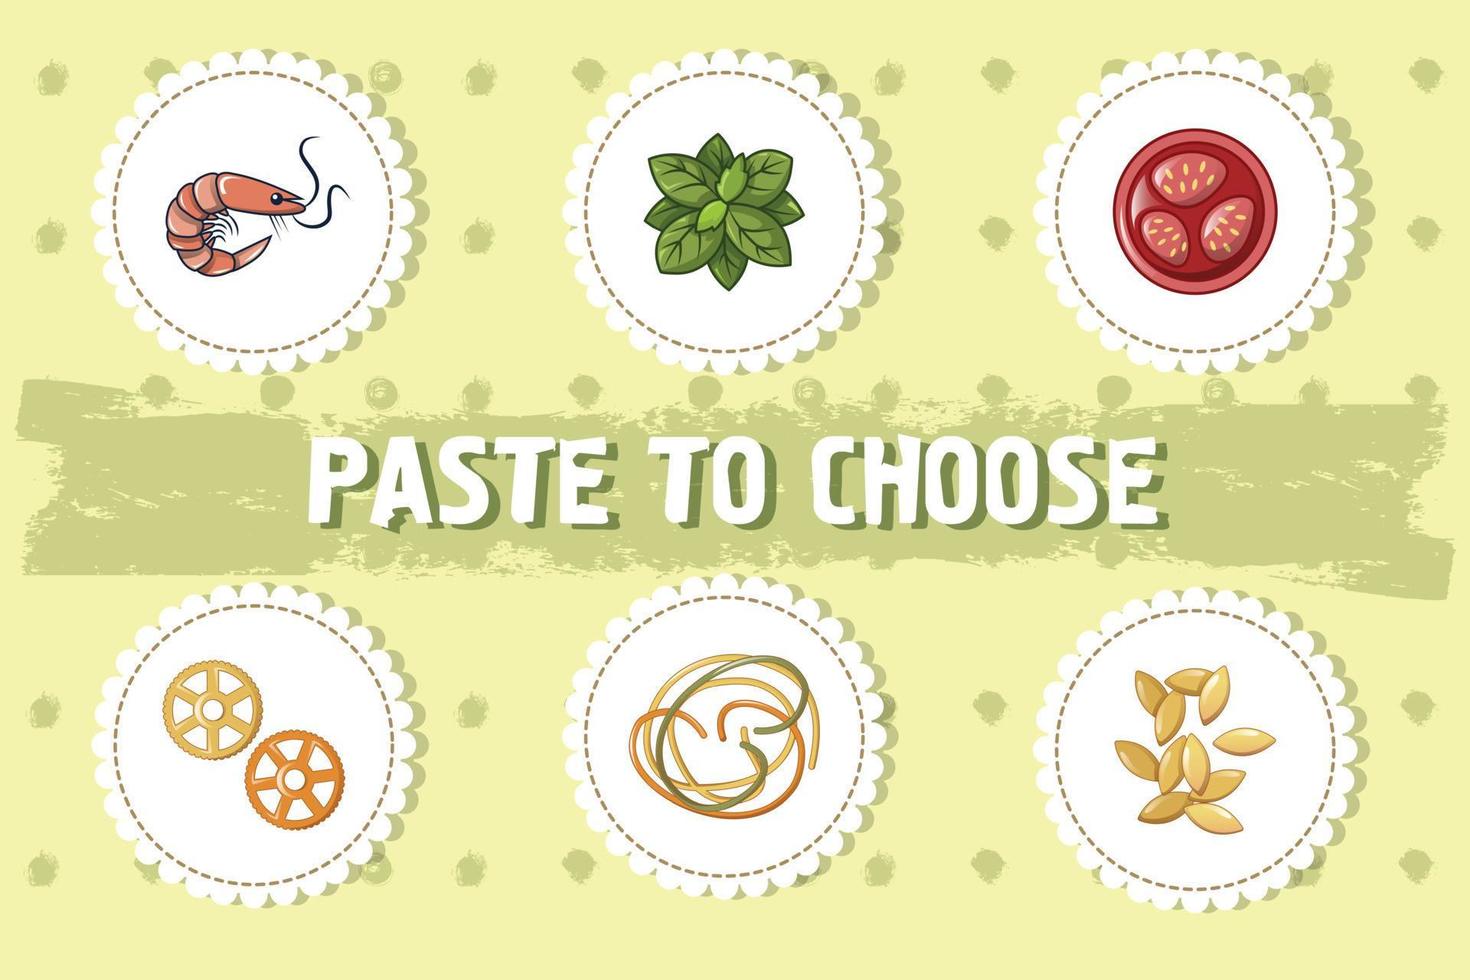 Paste to choose concept background, cartoon style vector